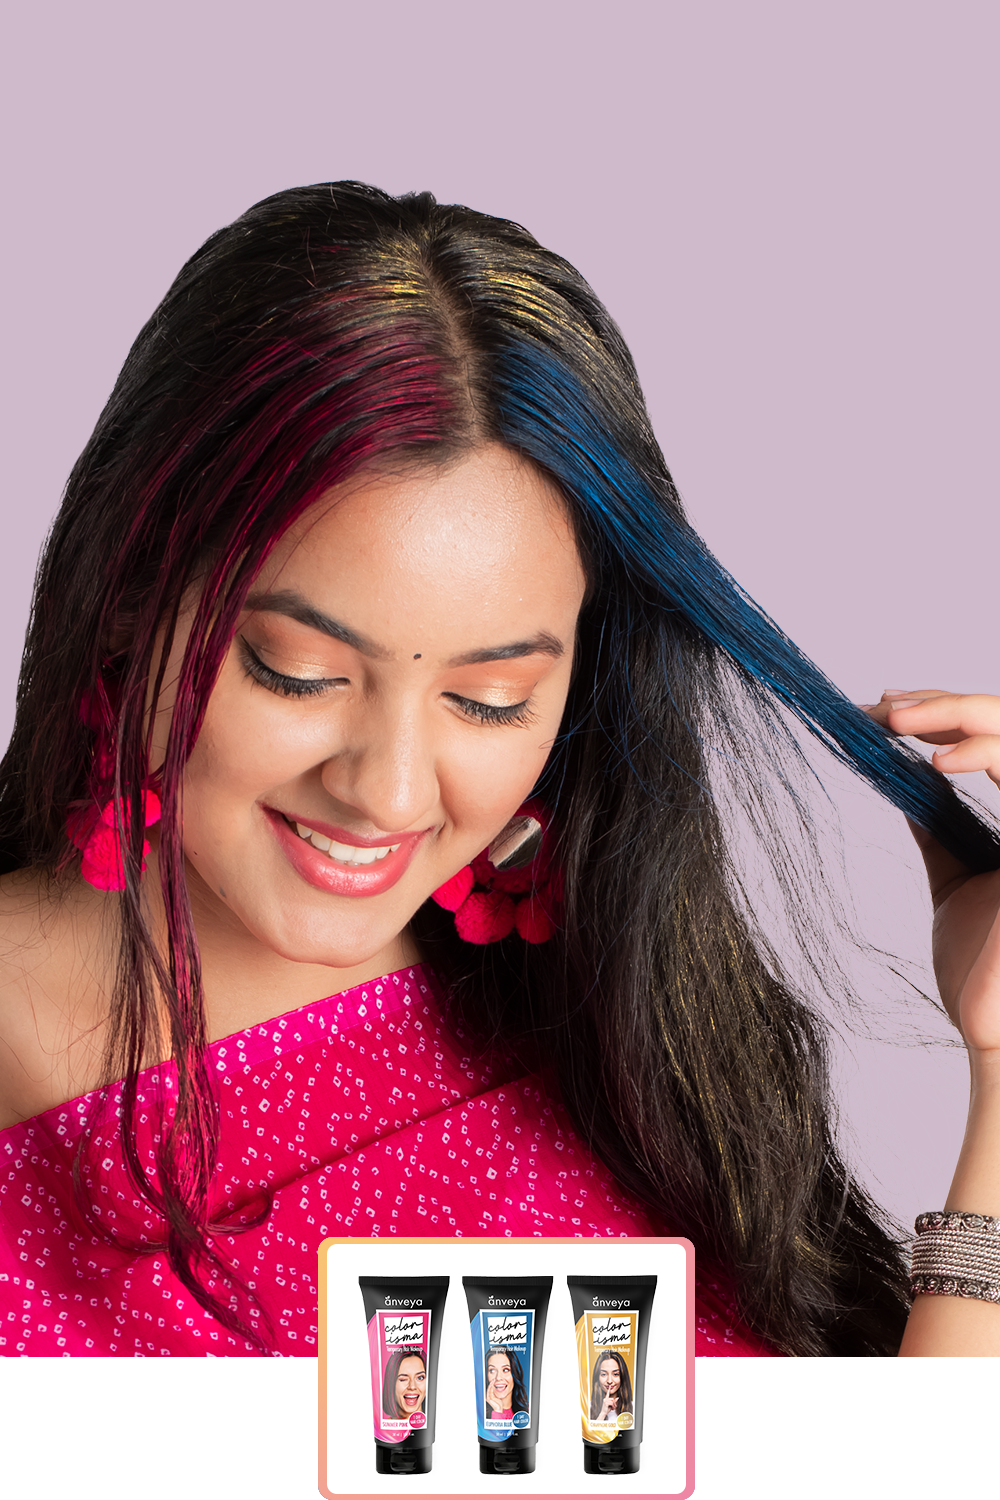 Anveya Euphoria Blue + Summer Pink + Champagne Gold | Look#3 - Temporary Hair Color